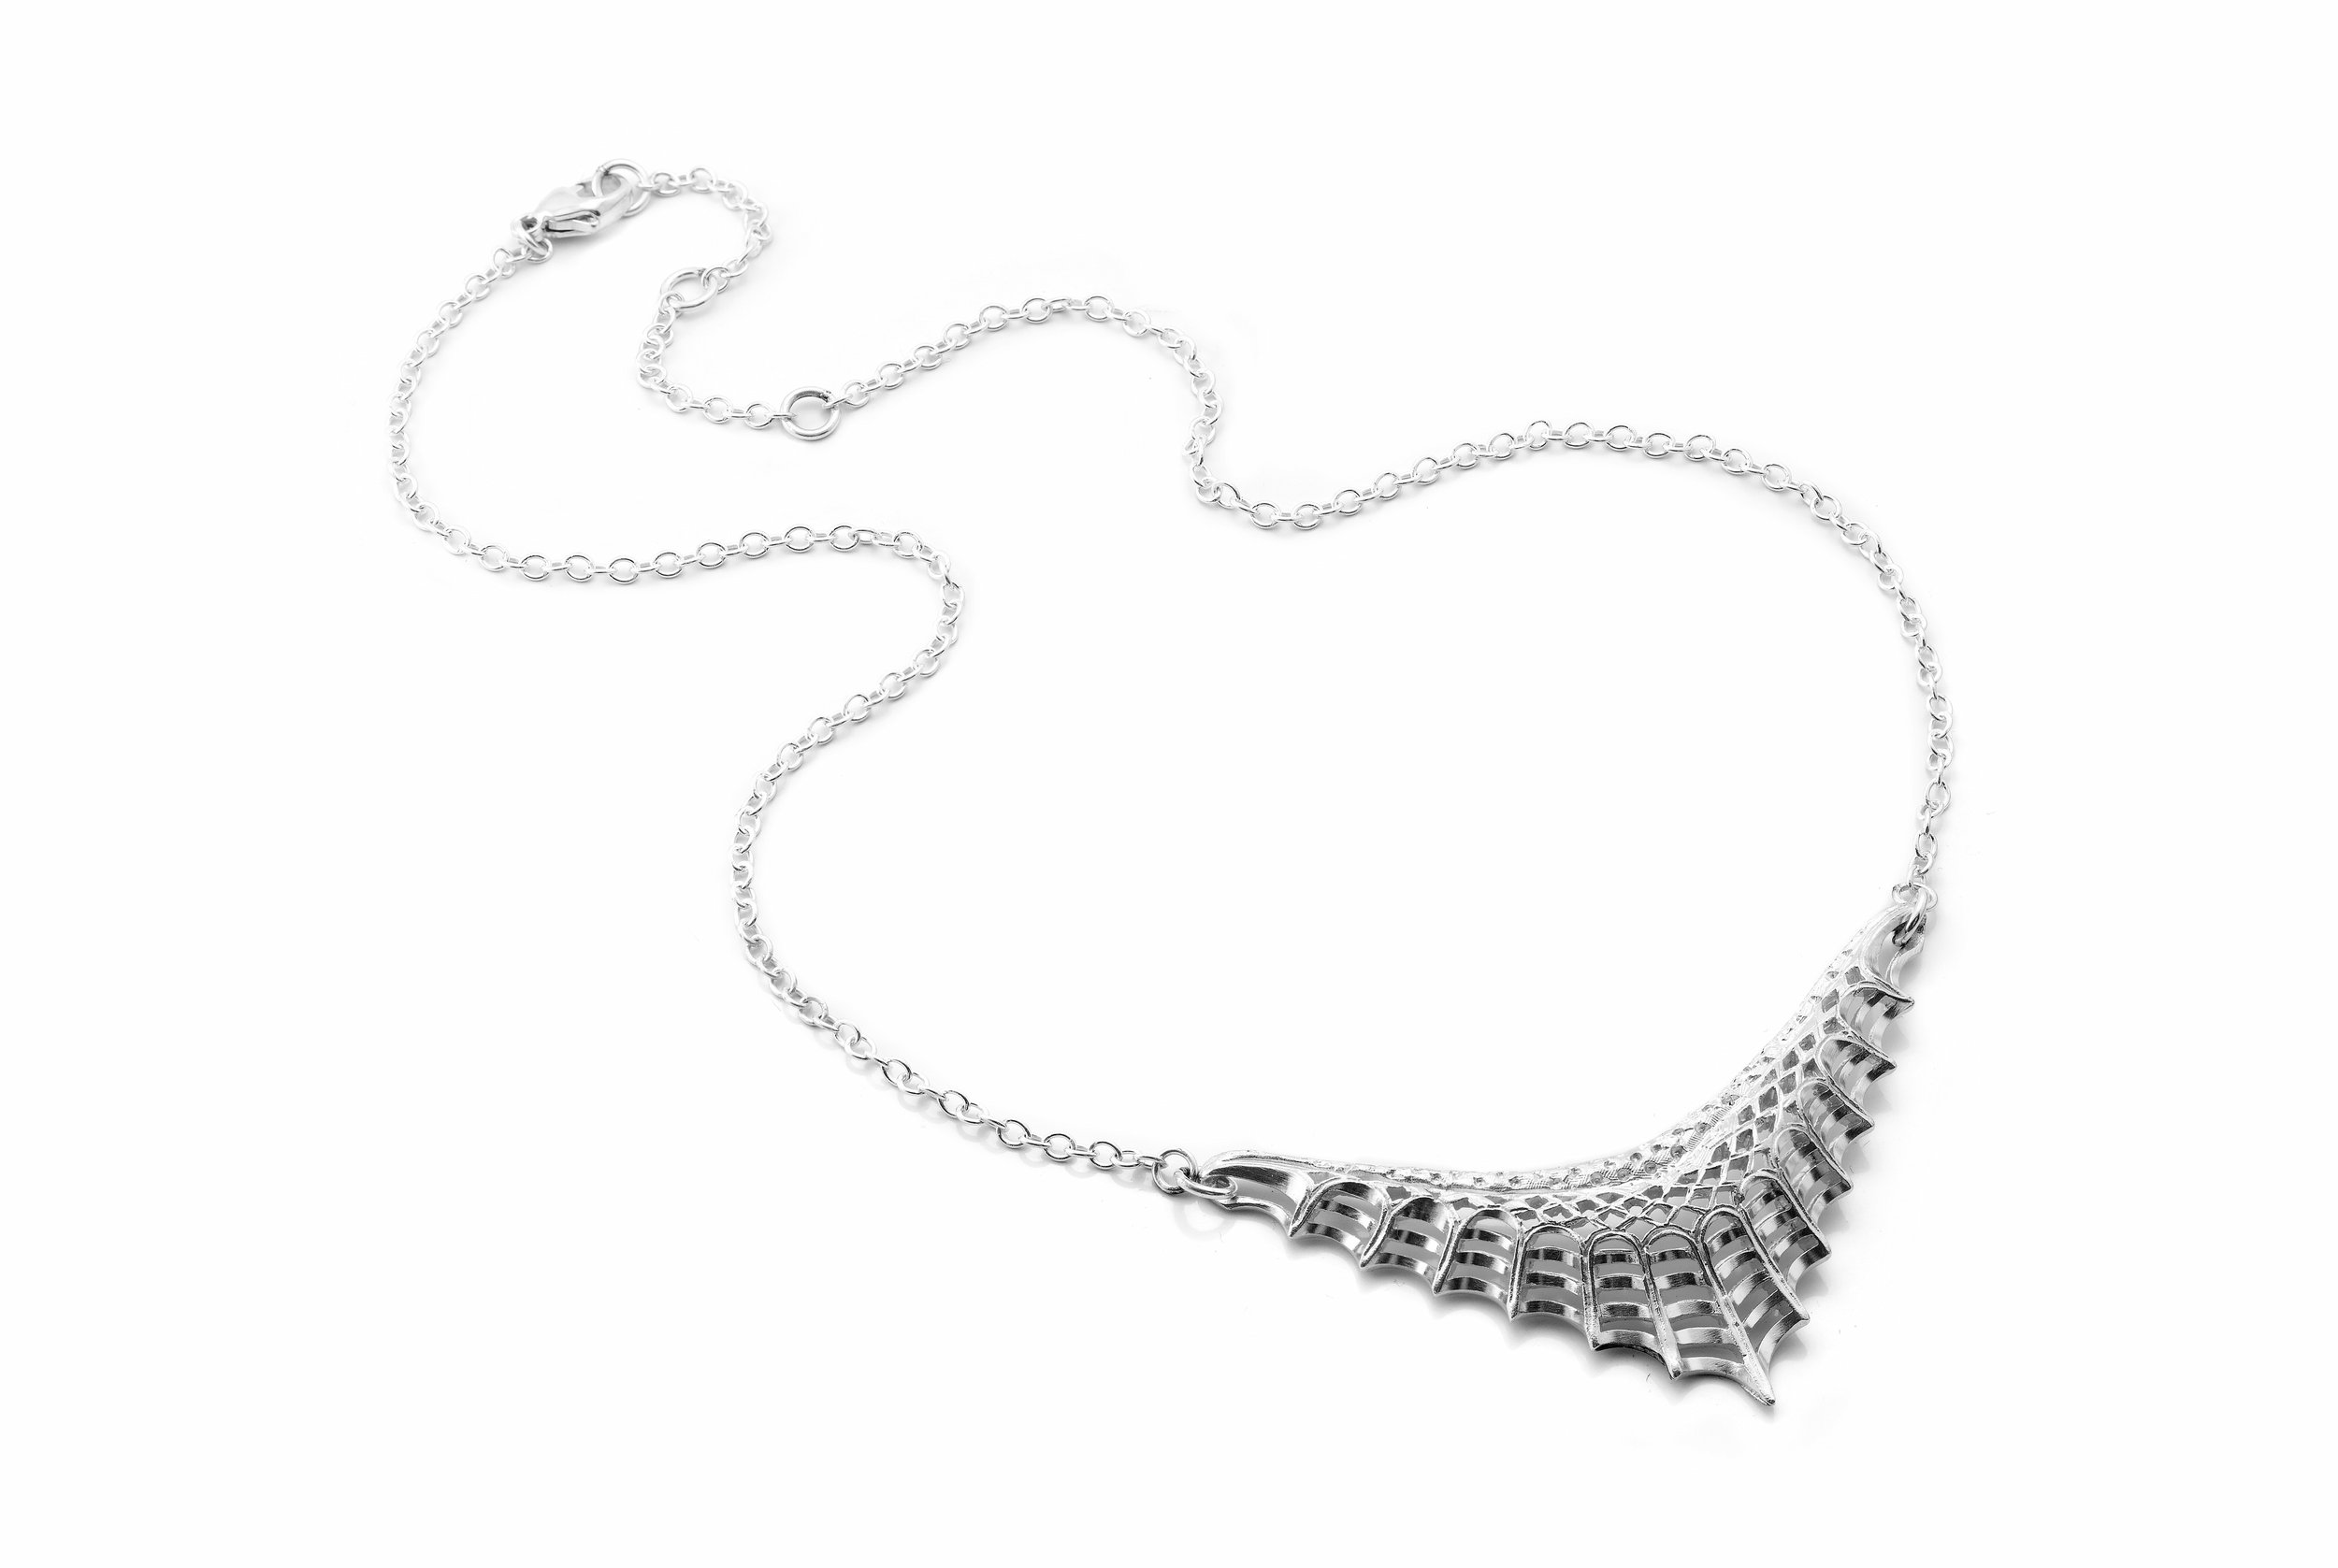 Shawl necklace in silver